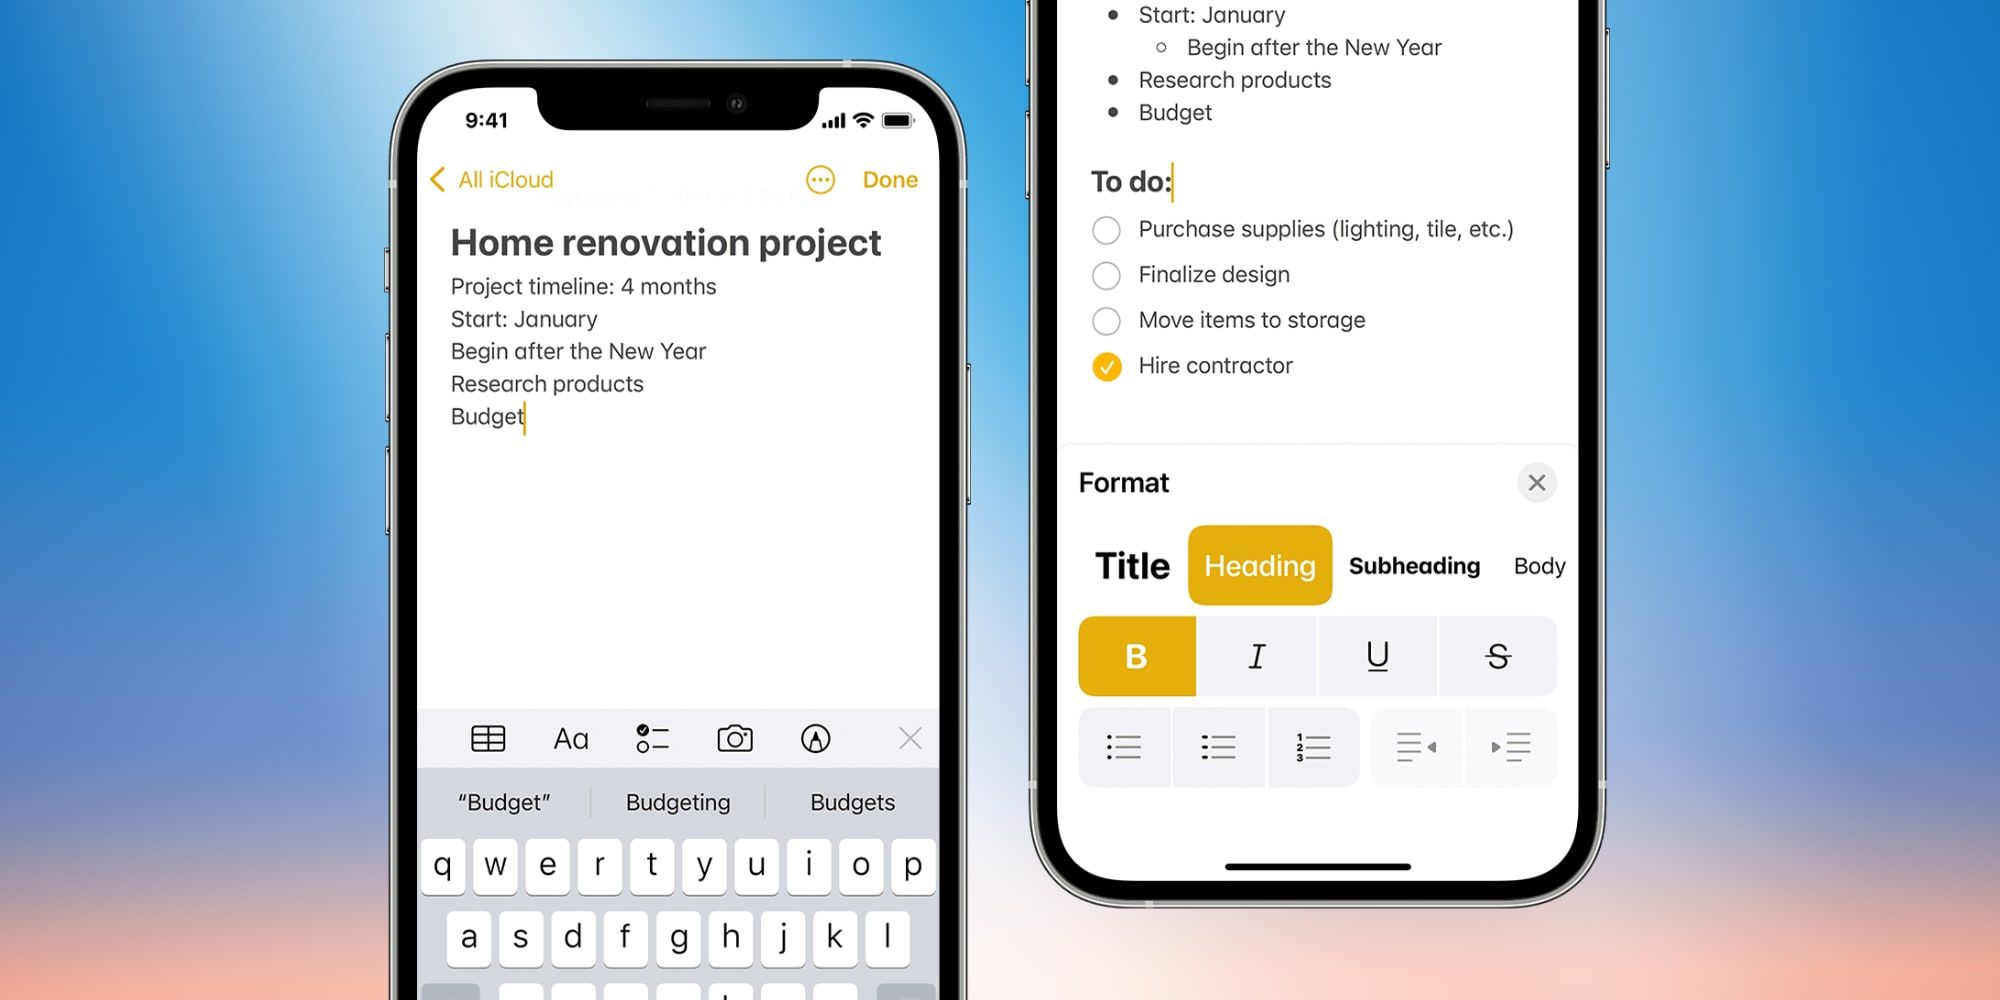 How To Style & Format Text In The iPhone’s Notes App